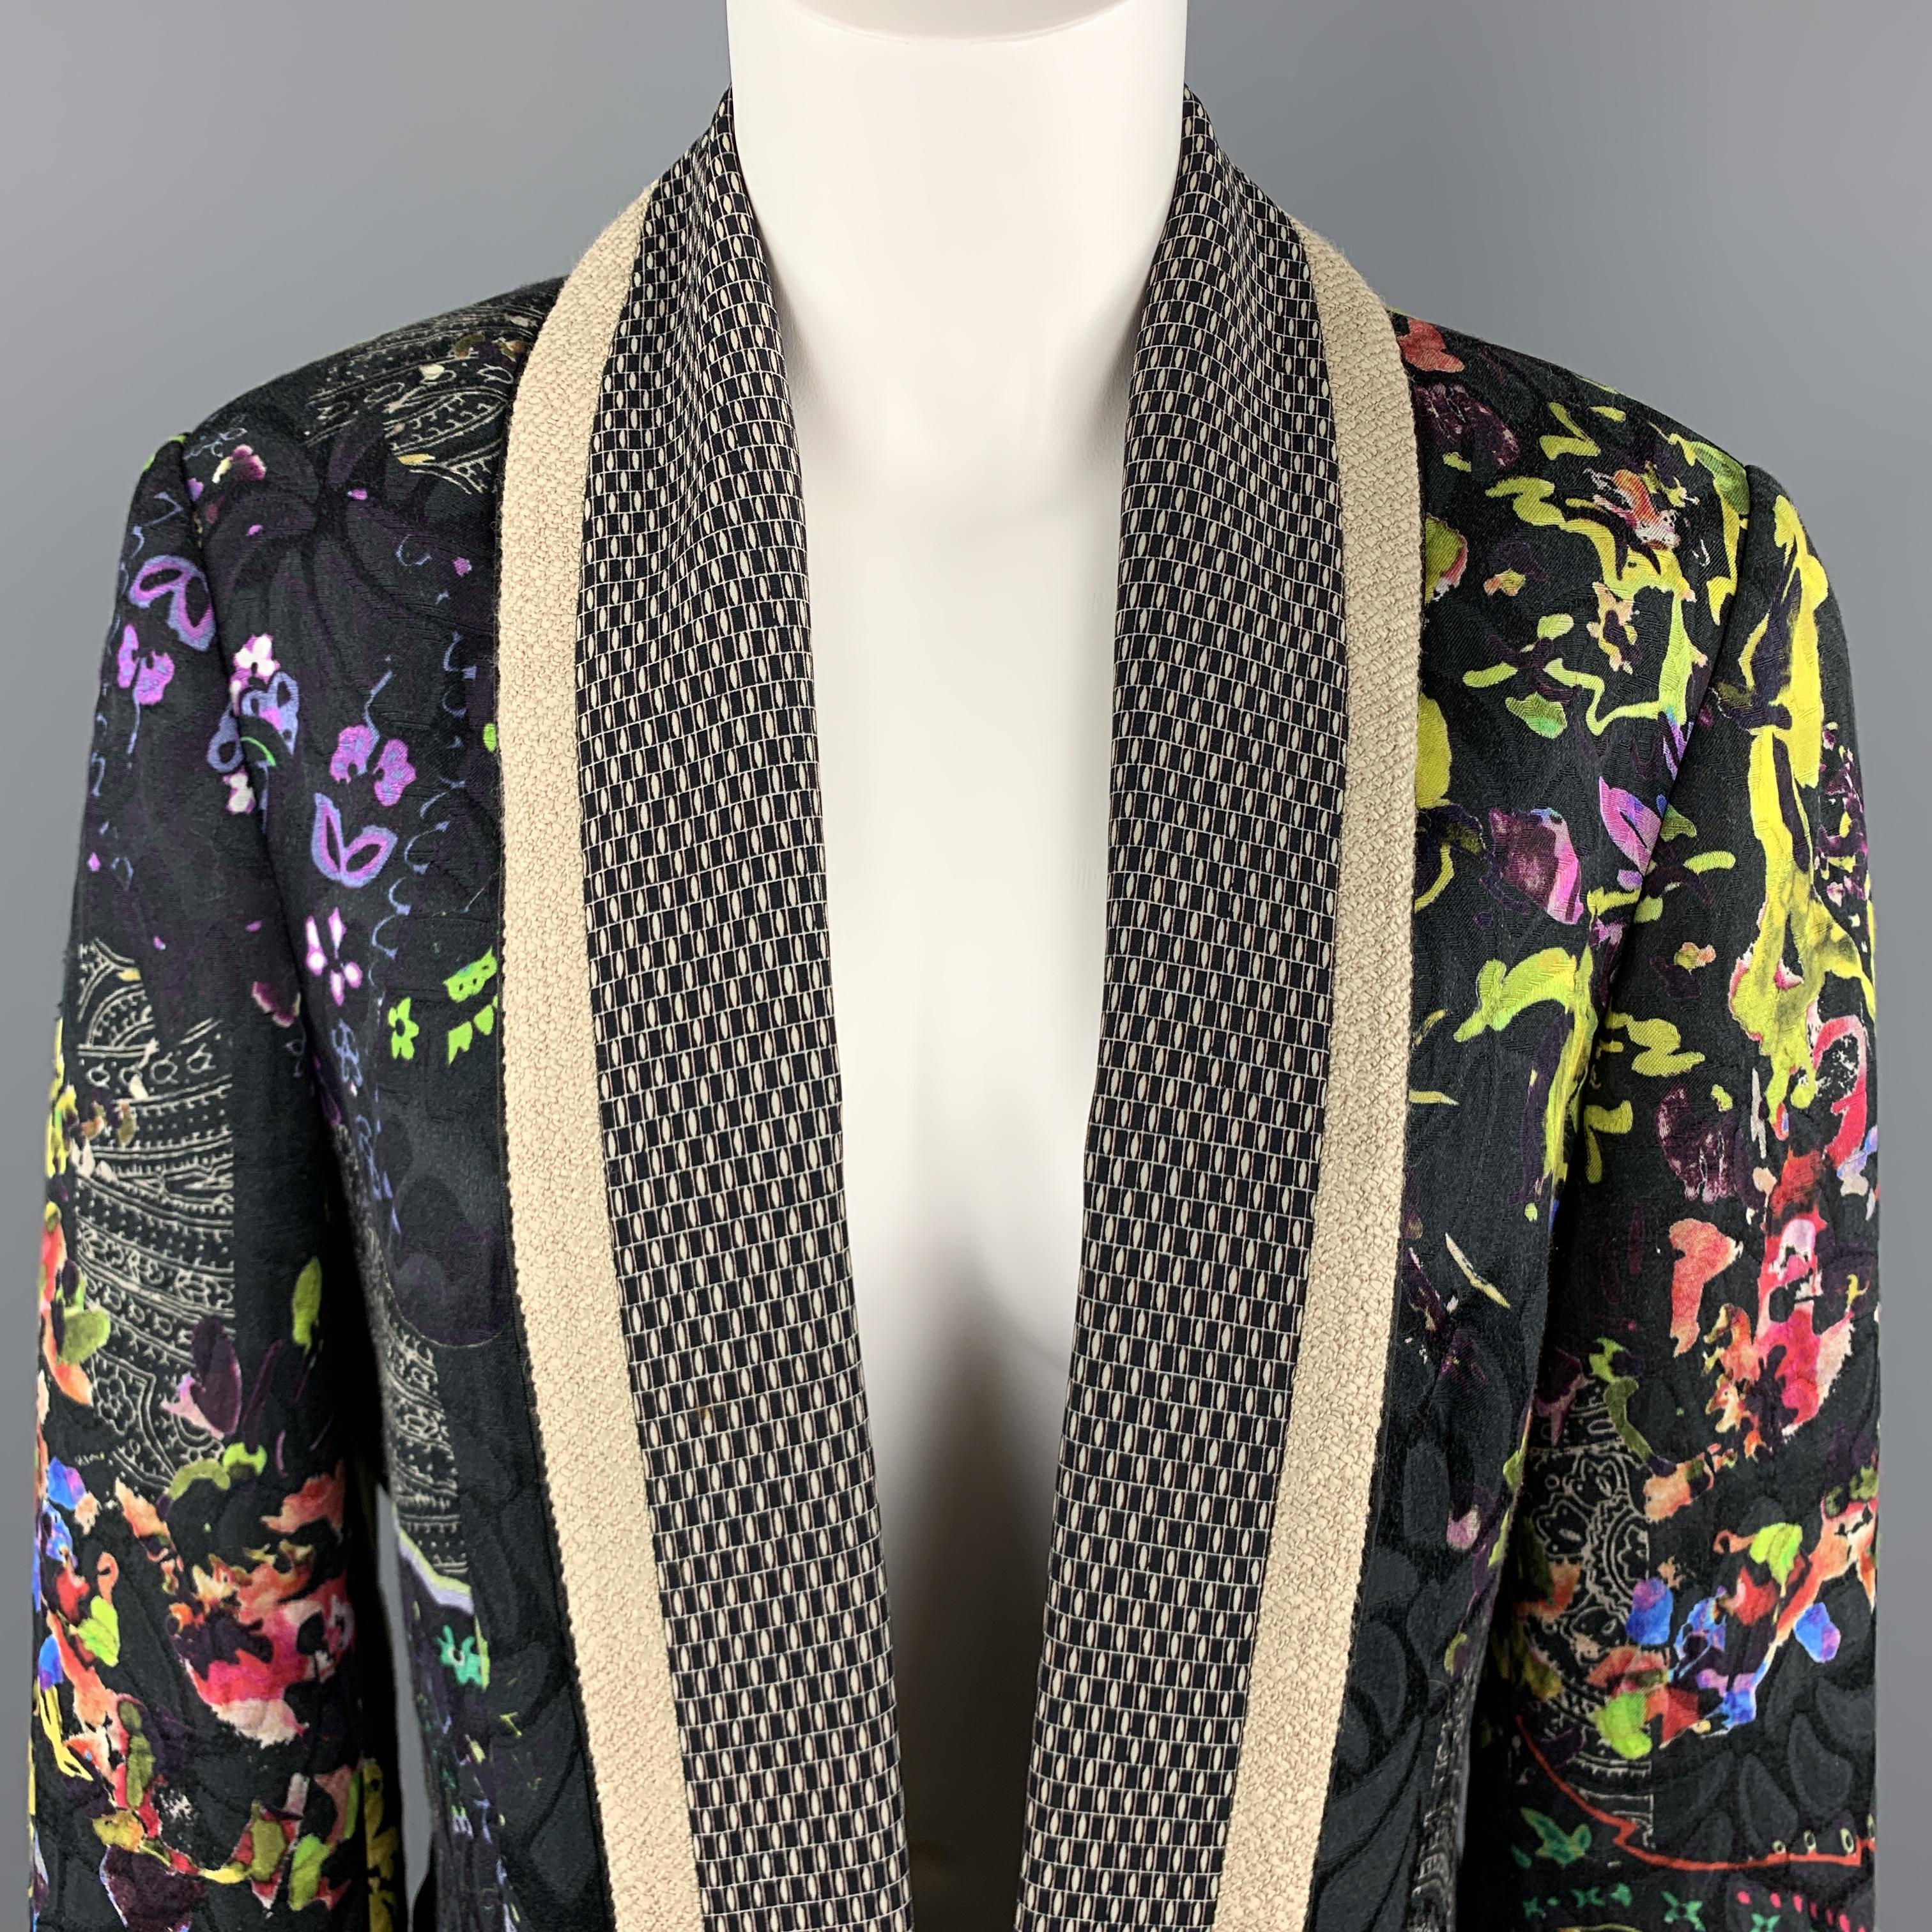 ETRO jacket comes in black and multi-color floral and paisley print with an open front, and woven trimmed shawl collar. Made in Italy.

Excellent Pre-Owned Condition.
Marked: IT 48

Measurements:

Shoulder: 16 in.
Bust: 42 in.
Sleeve: 23 in.
Length: